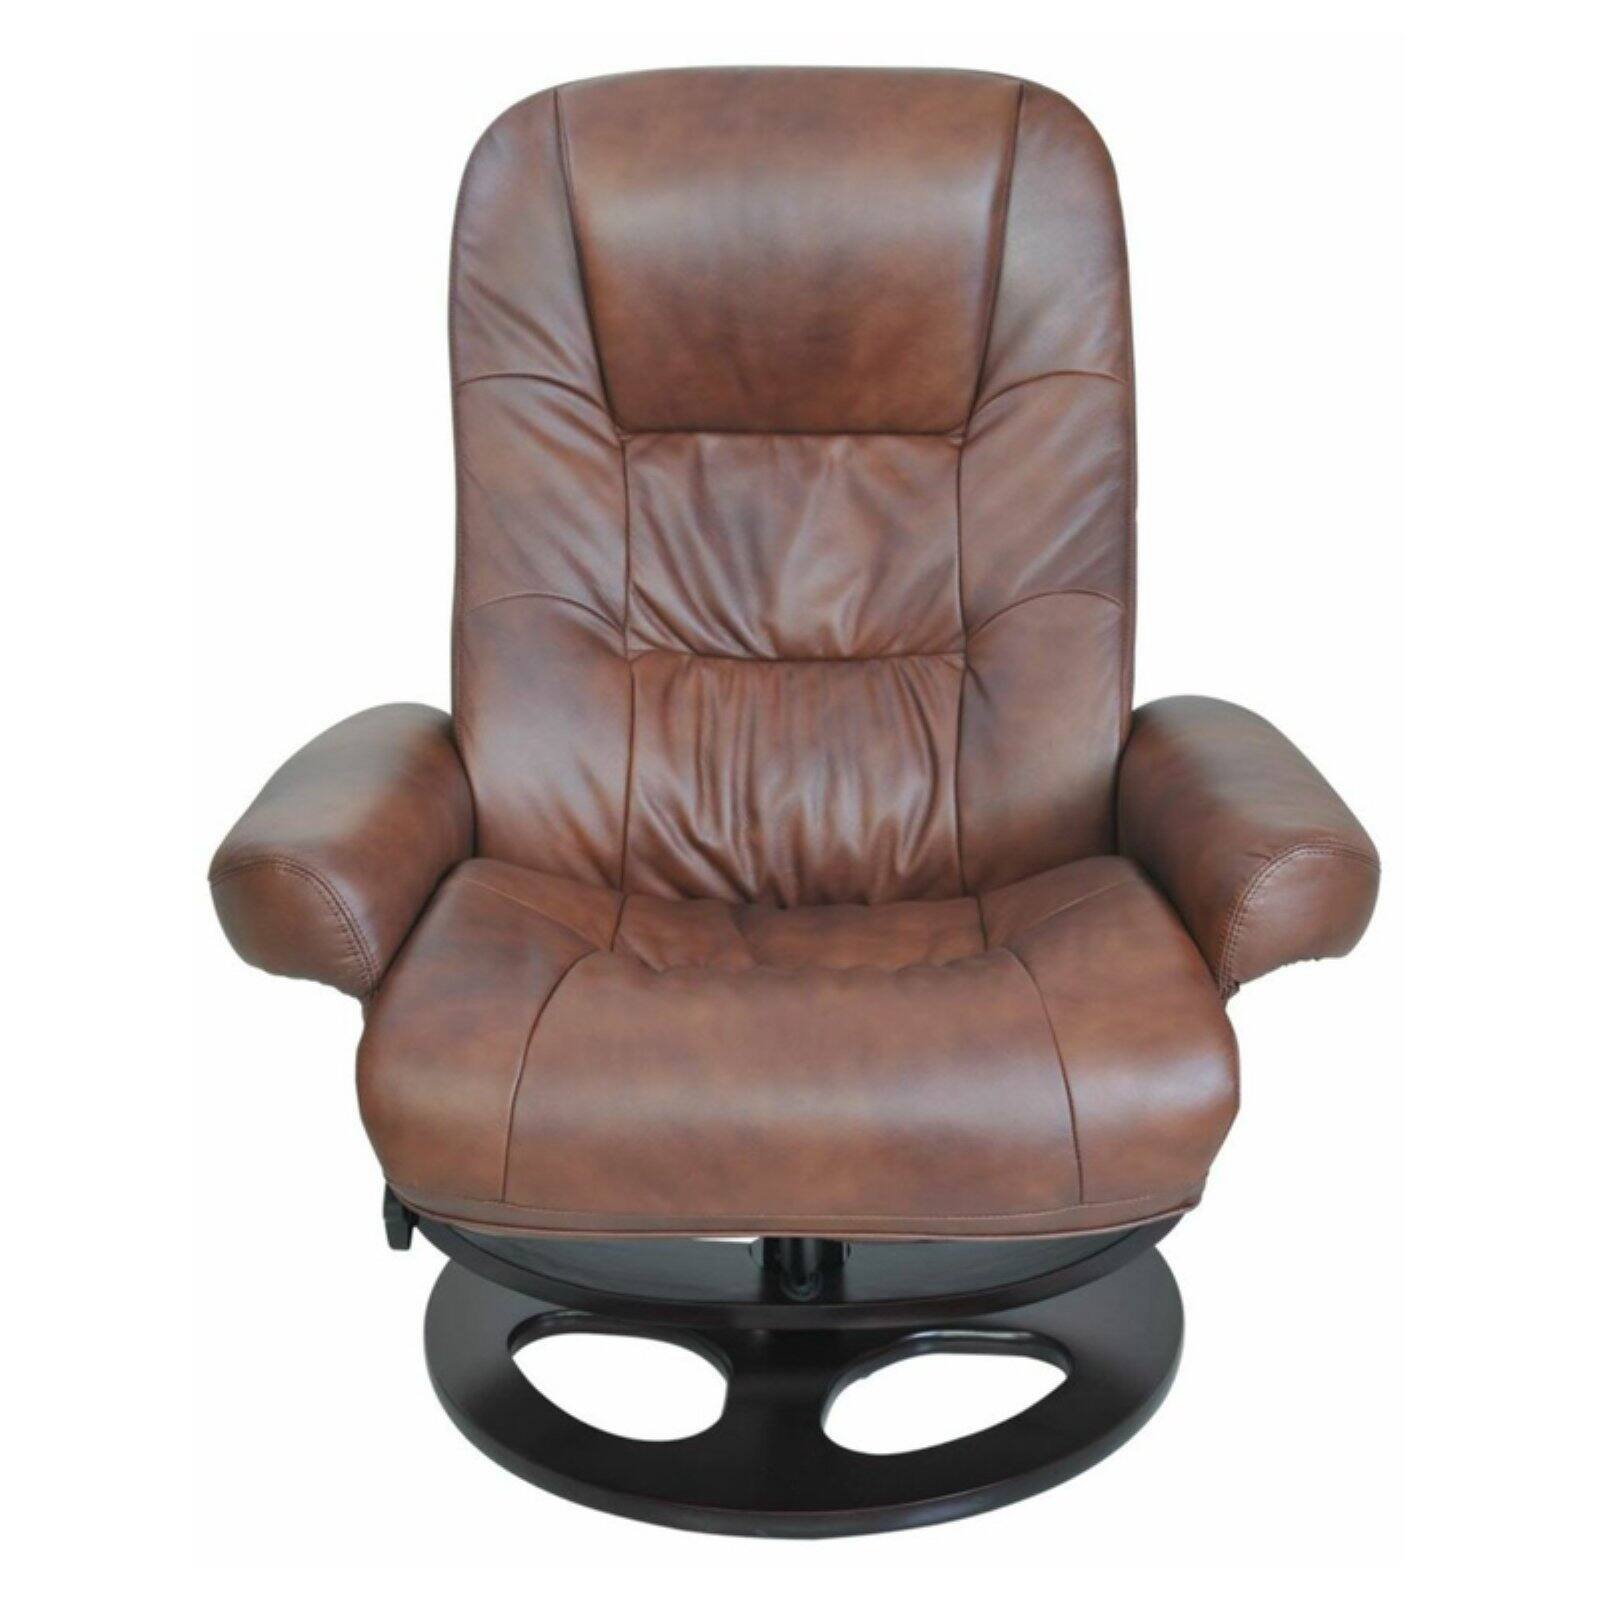 Barcalounger 15-8021 Jacque Swivel Pedestal Recliner w/Ottoman, Whiskey - image 3 of 9